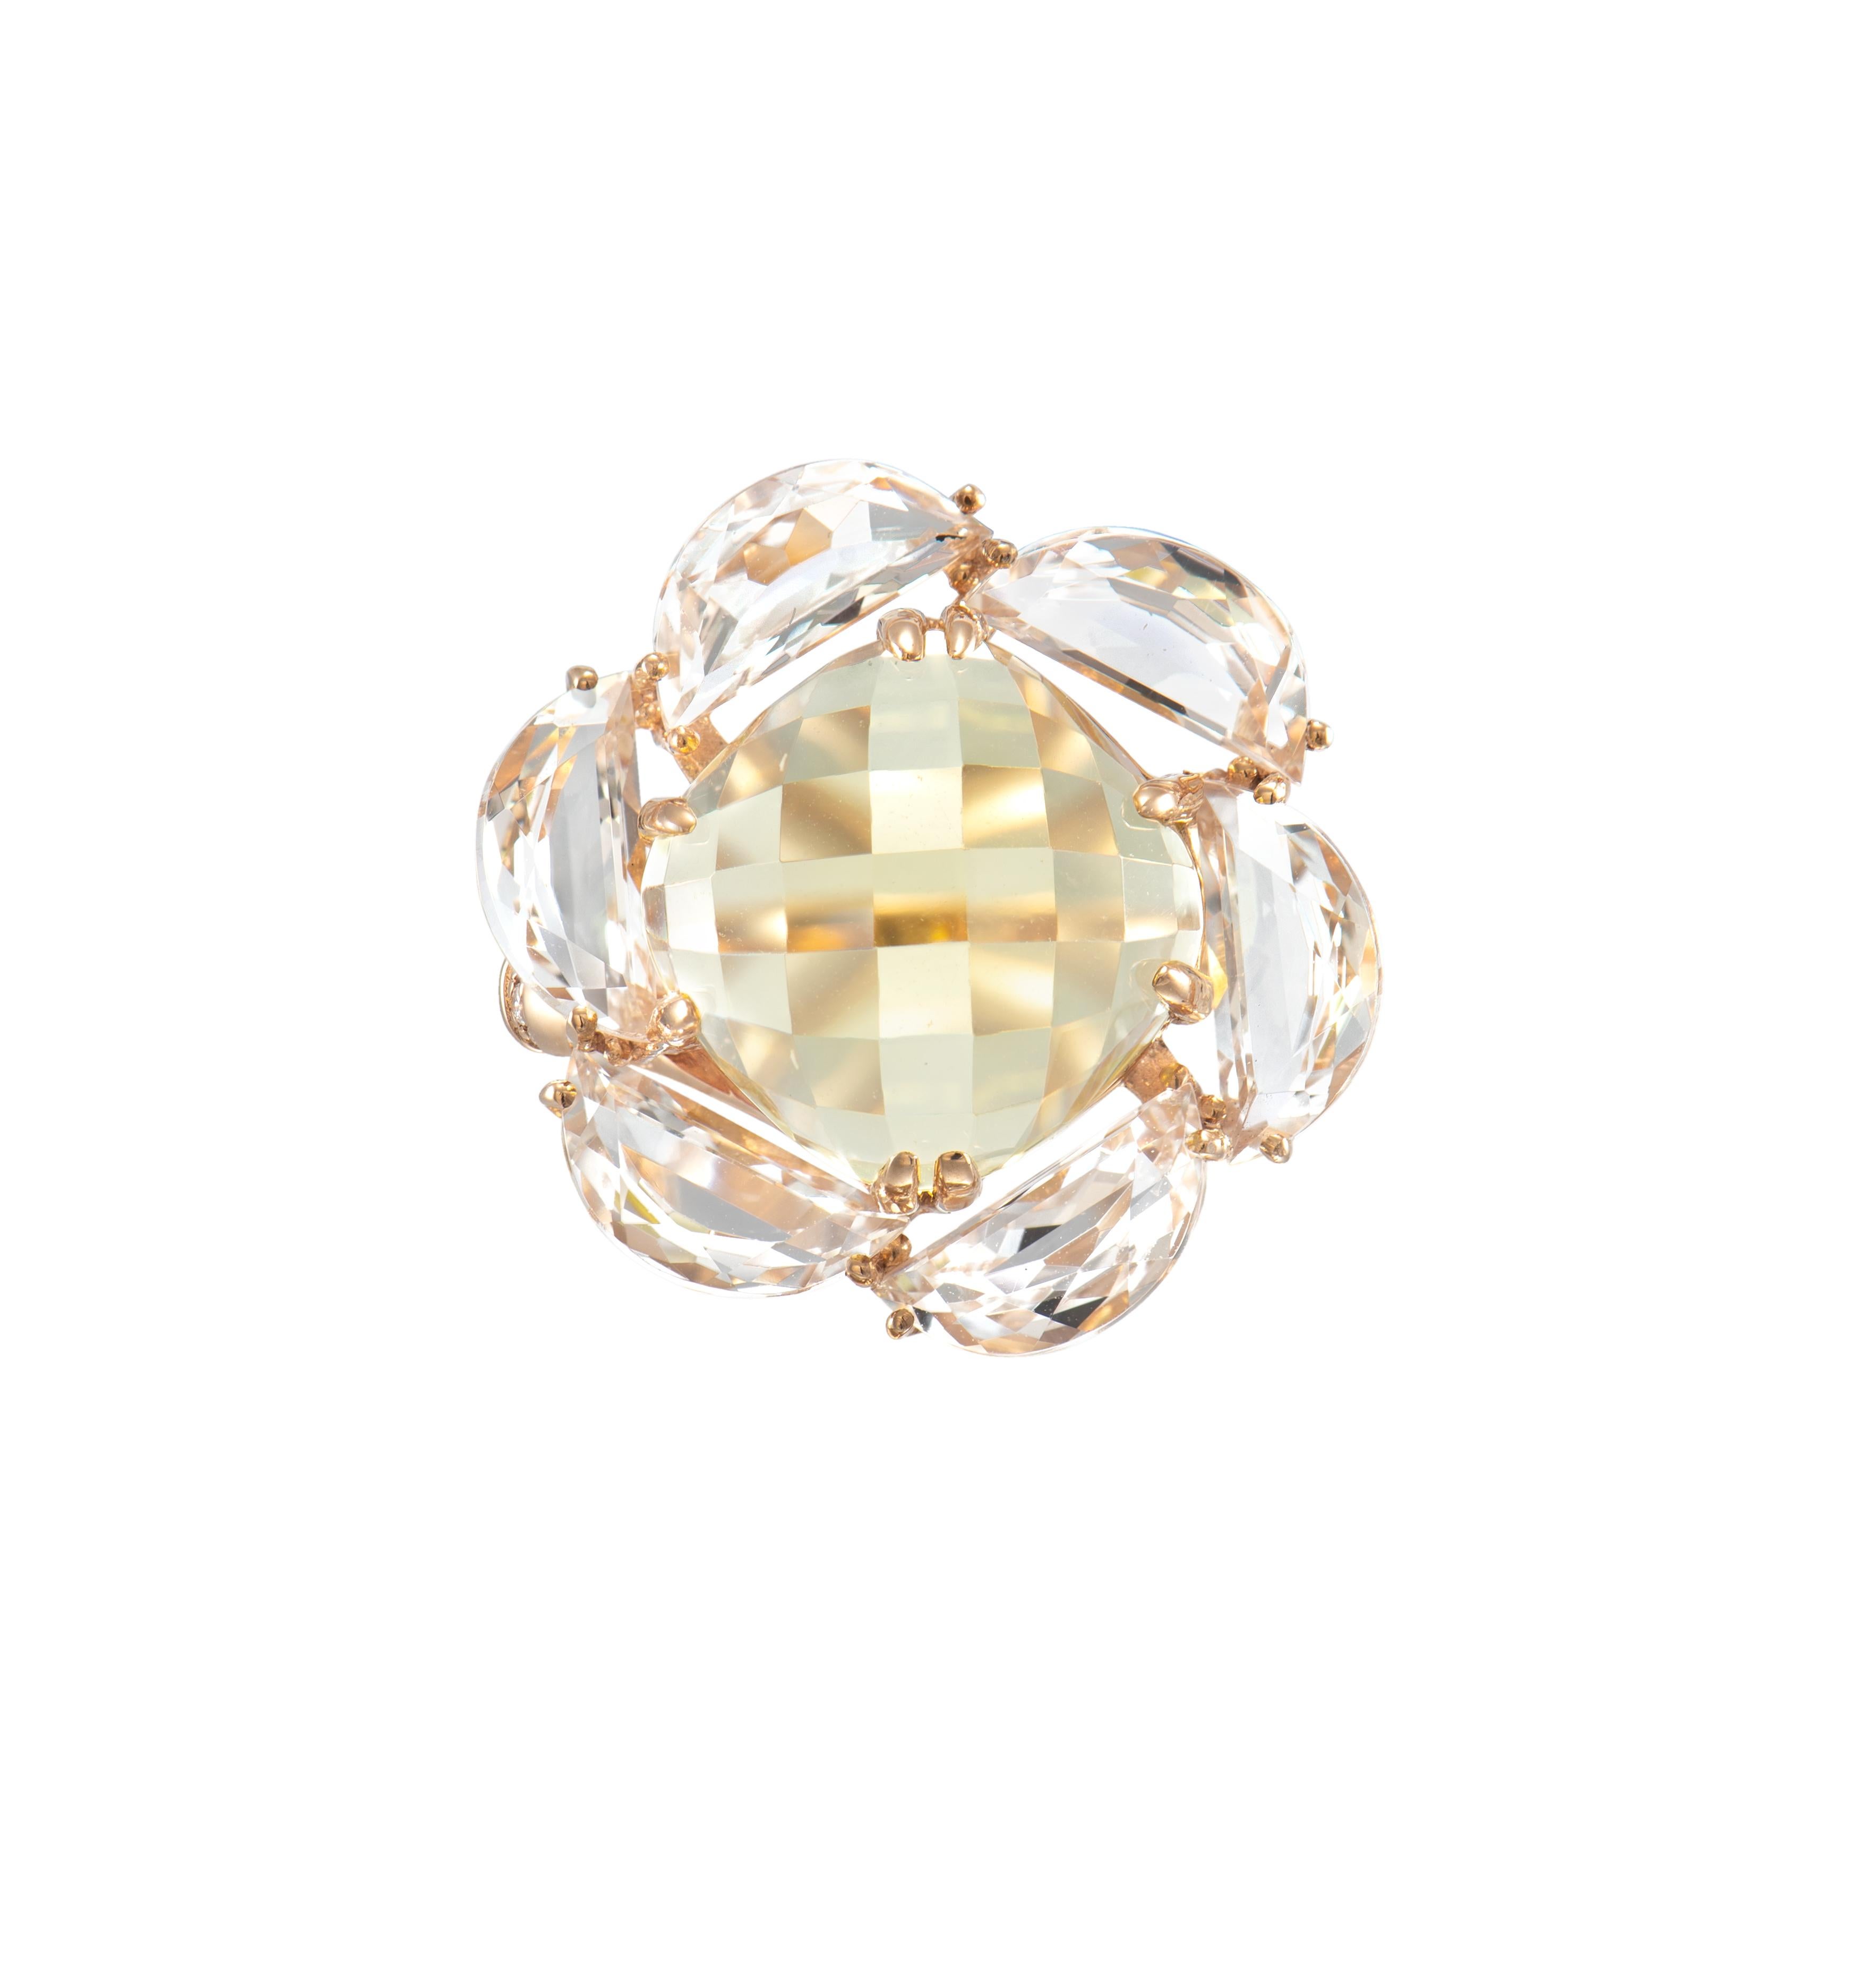 Contemporary Lemon Quartz Ring in 18 Karat Rose Gold with Topaz and Diamond. For Sale